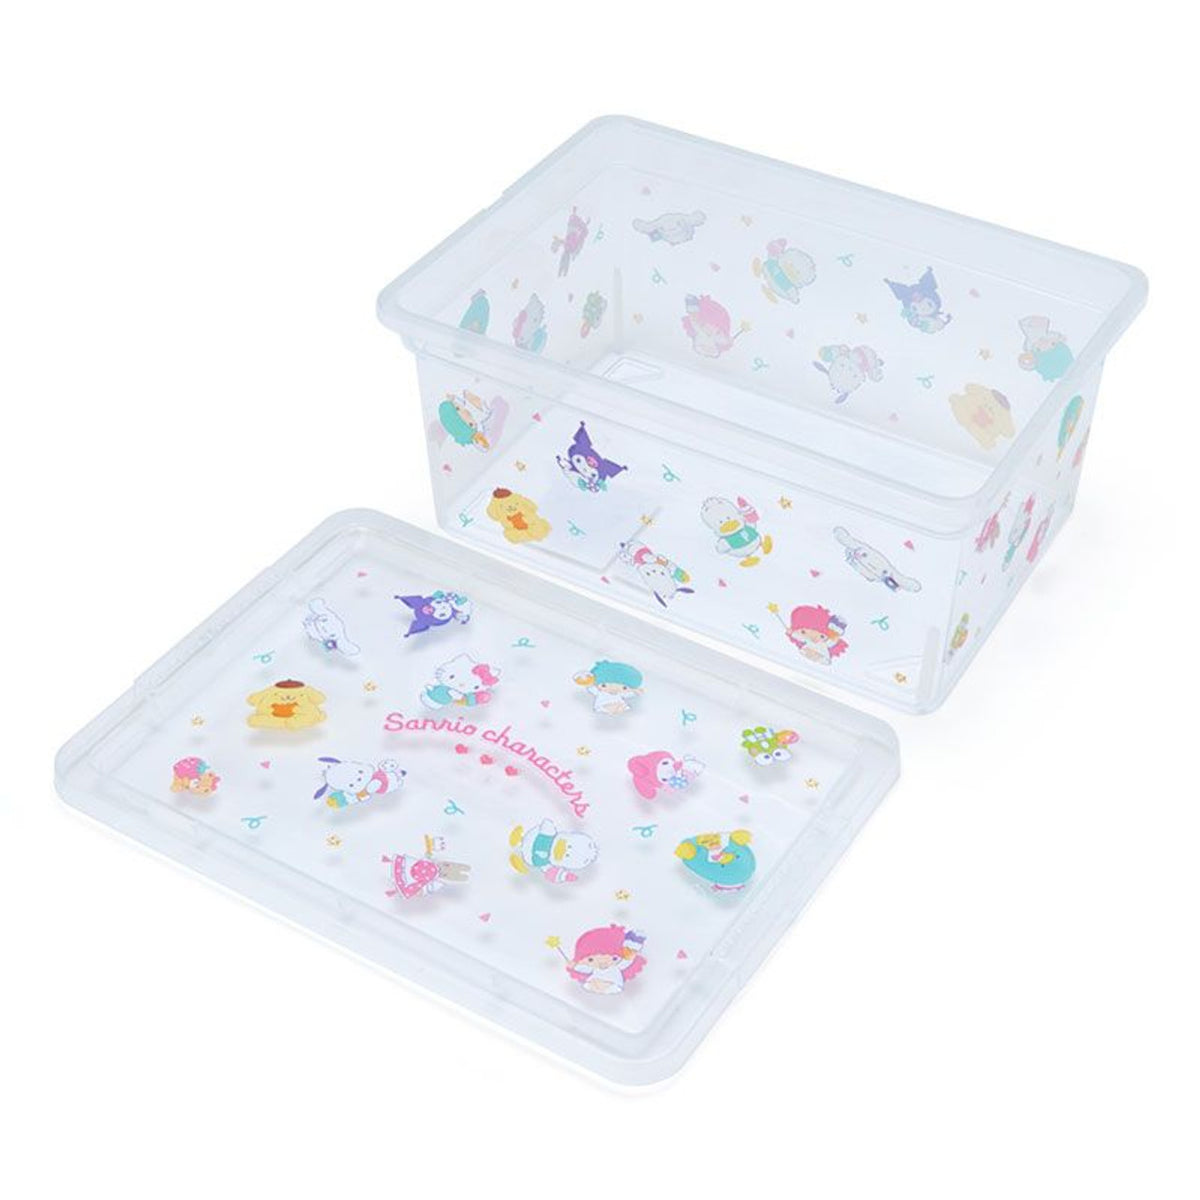 T's Factory Sanrio Characters Two-Tier Storage Box